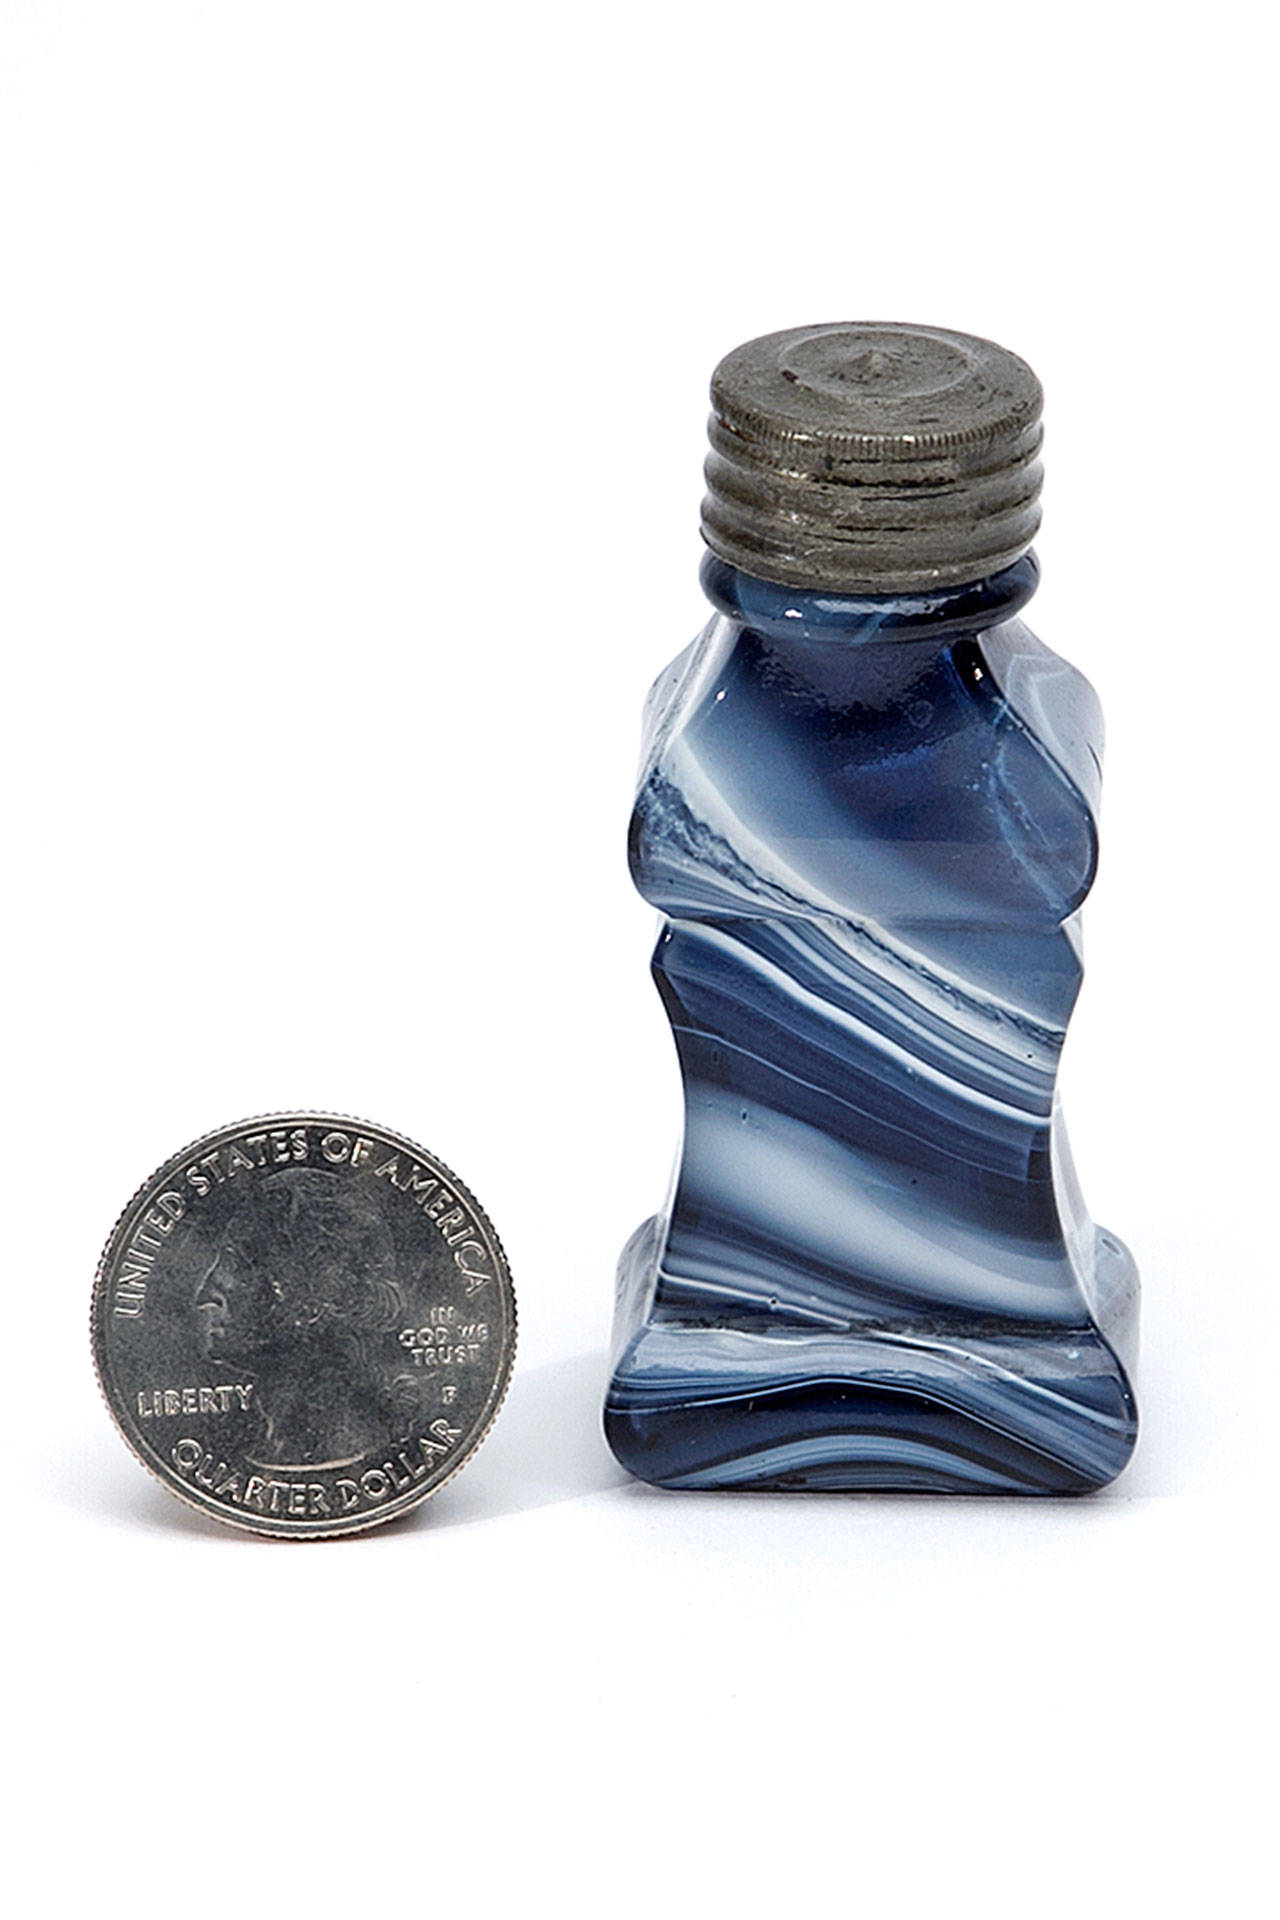 No, it’s not a saltshaker — this is a smelling salt bottle made about in 1850. It auctioned for $293. (Cowles Syndicate Inc.)